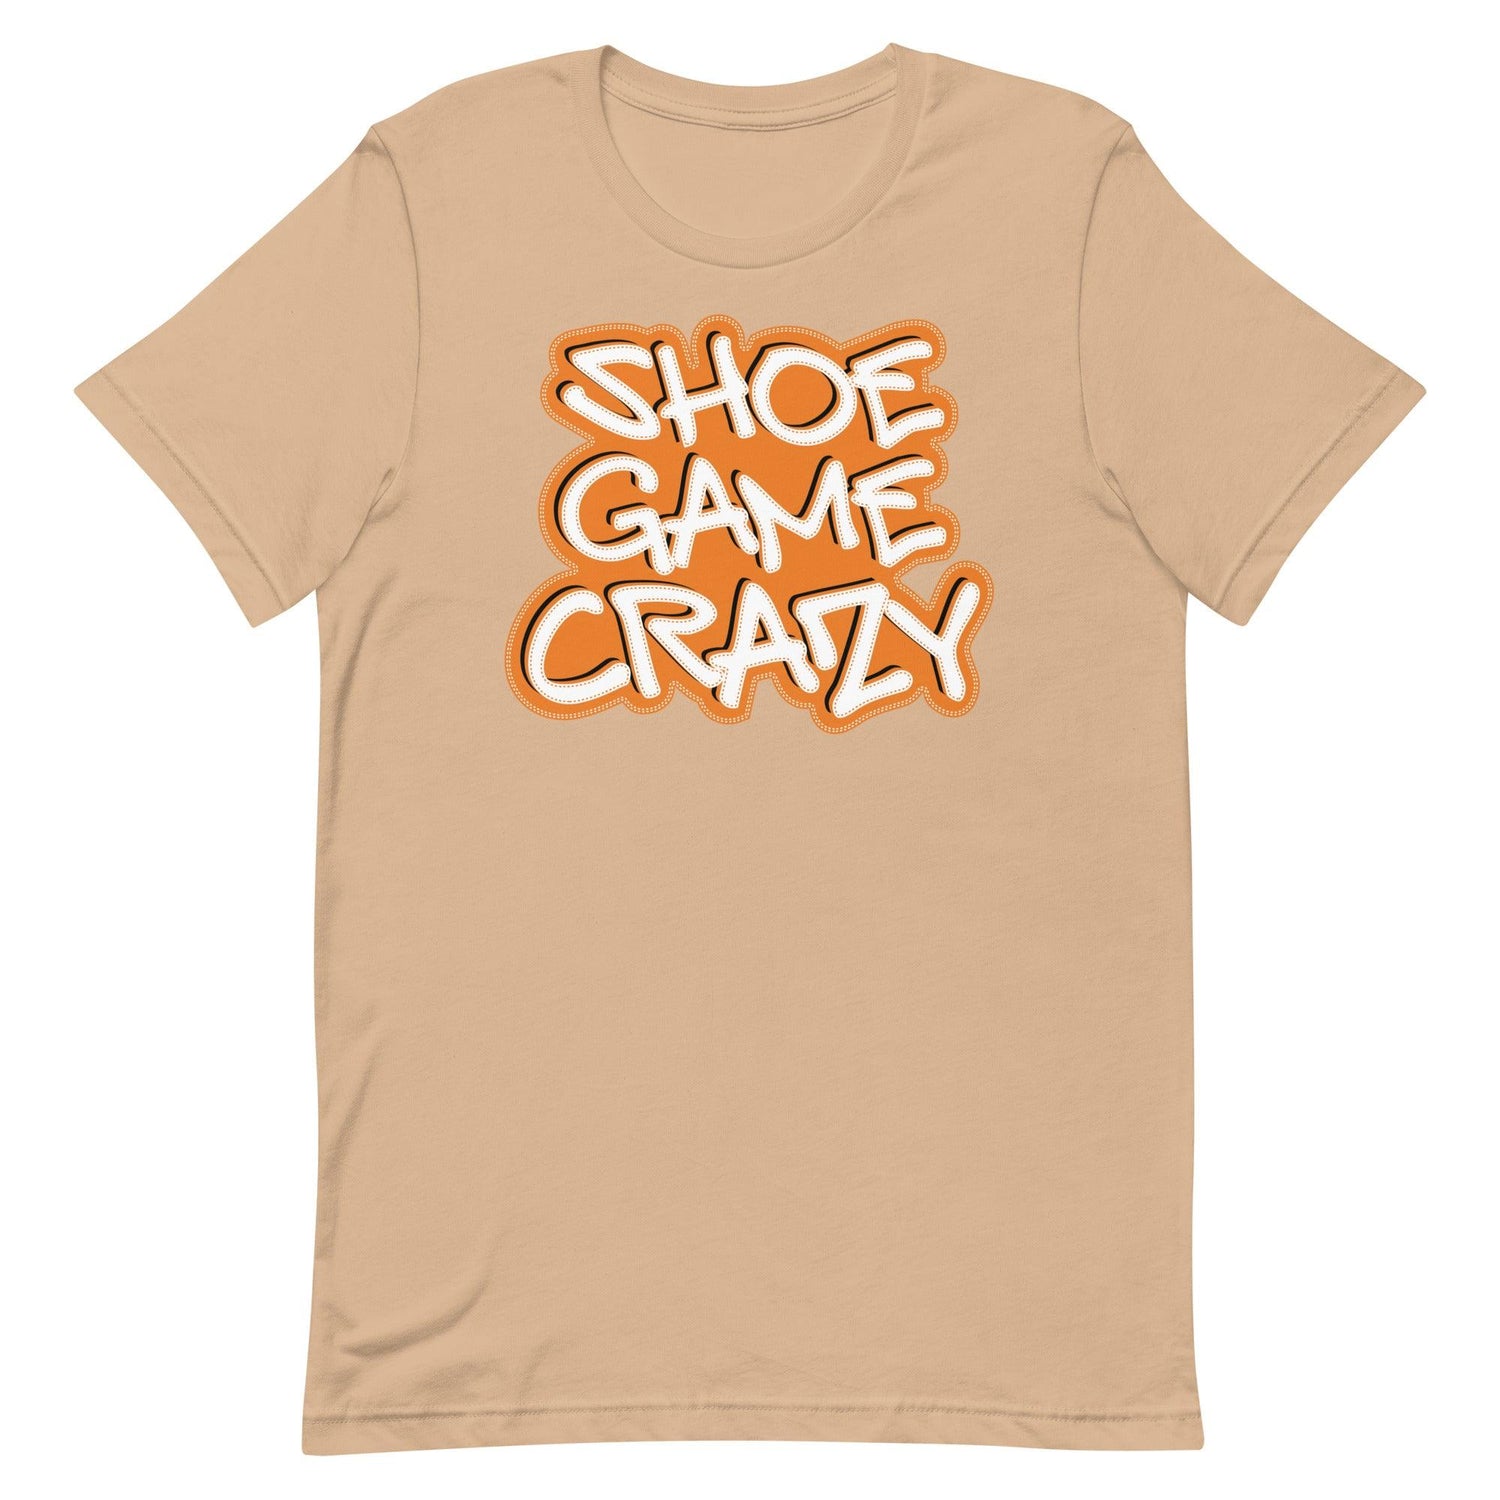 Shoe Game Crazy Shirt To Match Nike Air Force 1 Low Certified Fresh - SNKADX